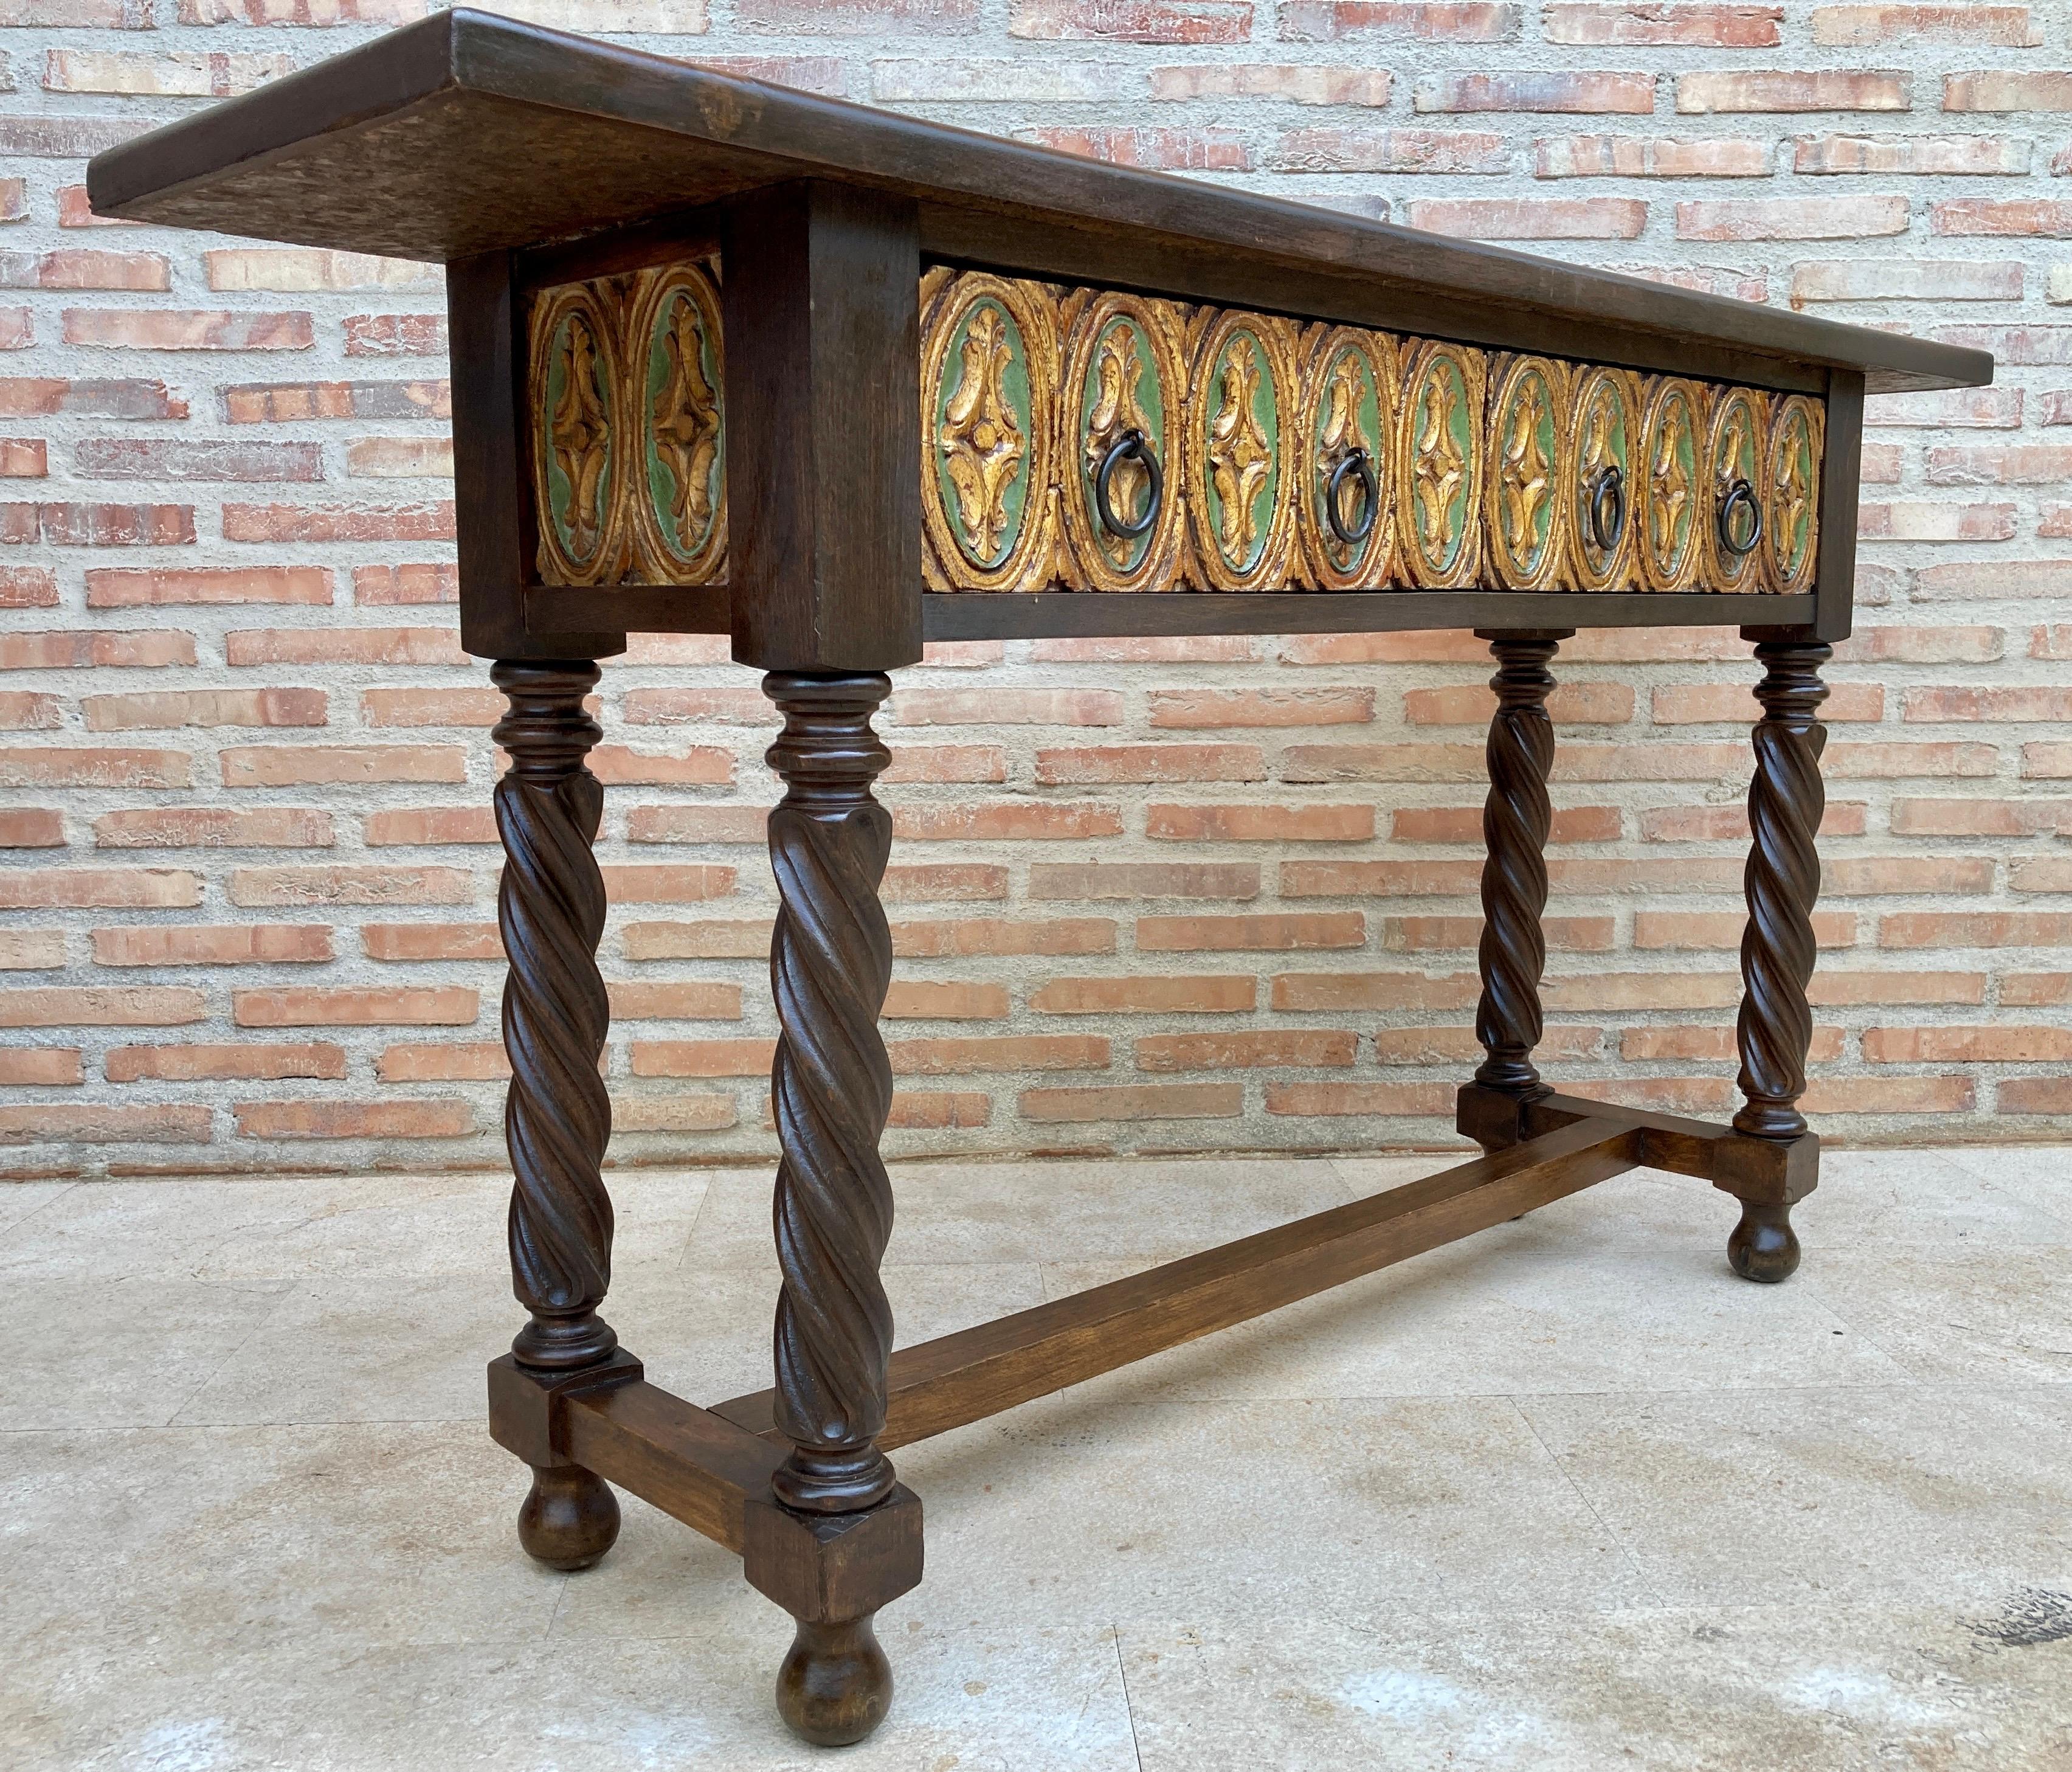 Castilian mid century console table in walnut with two front drawers in gold leaf. 
Beautiful console in walnut and gold leaf, with an original mid-century style from the 40s. 
It has two large drawers with iron handles. 
The console stands on